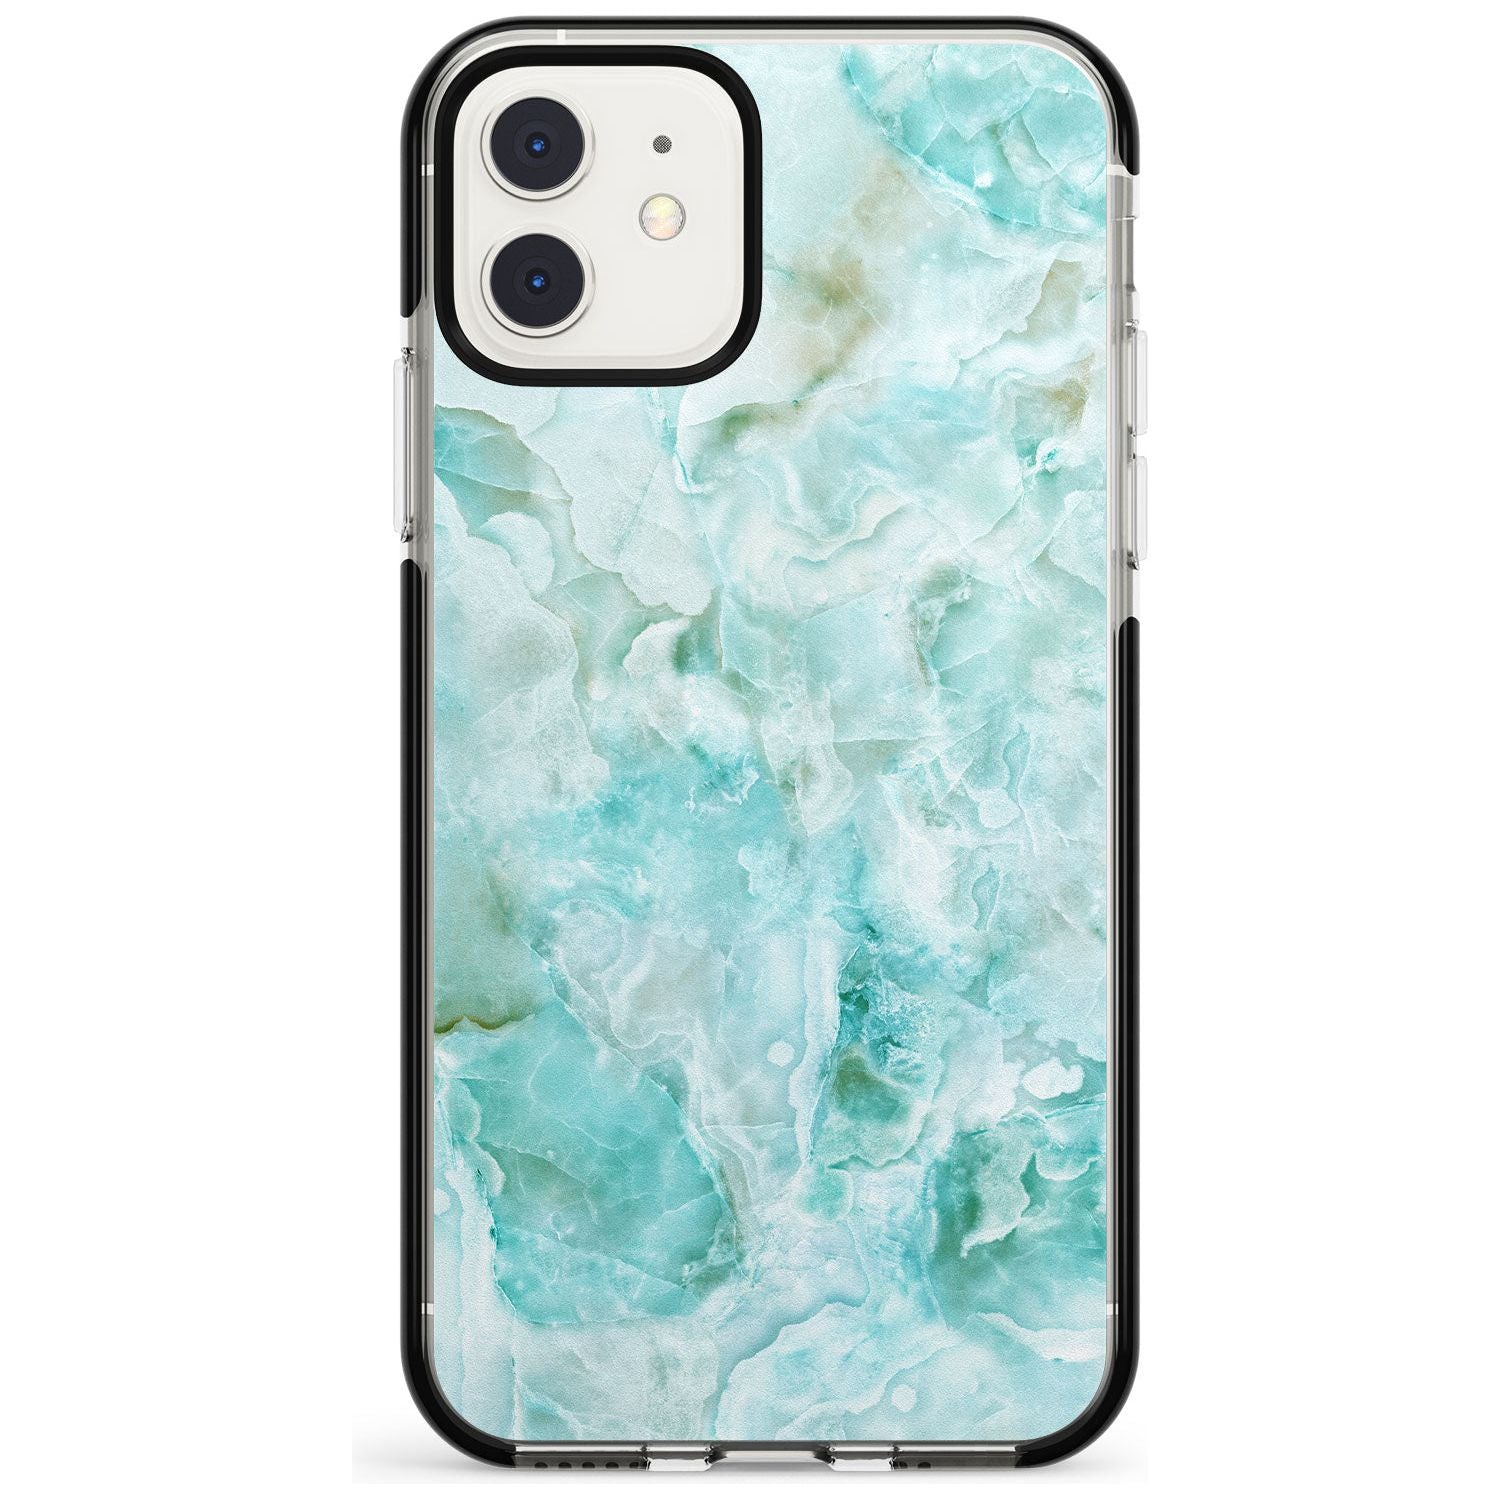 Turquoise Aqua Onyx Marble Pink Fade Impact Phone Case for iPhone 11 Pro Max